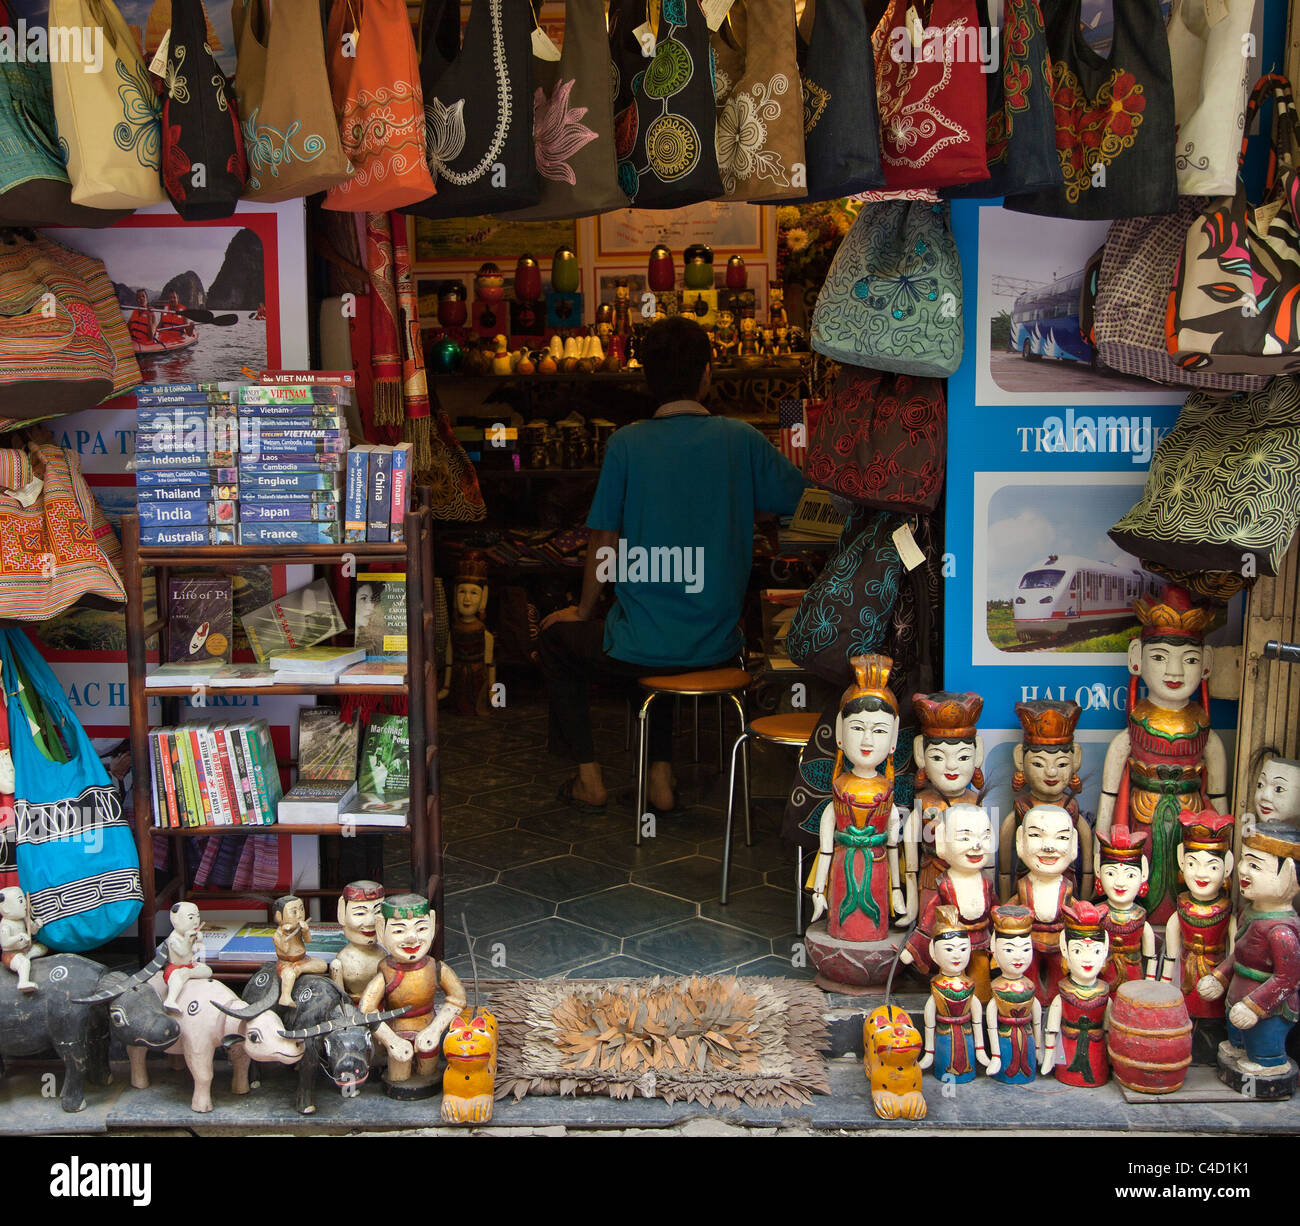 North Vietnam, tourist craft shop selling its wares Stock Photo